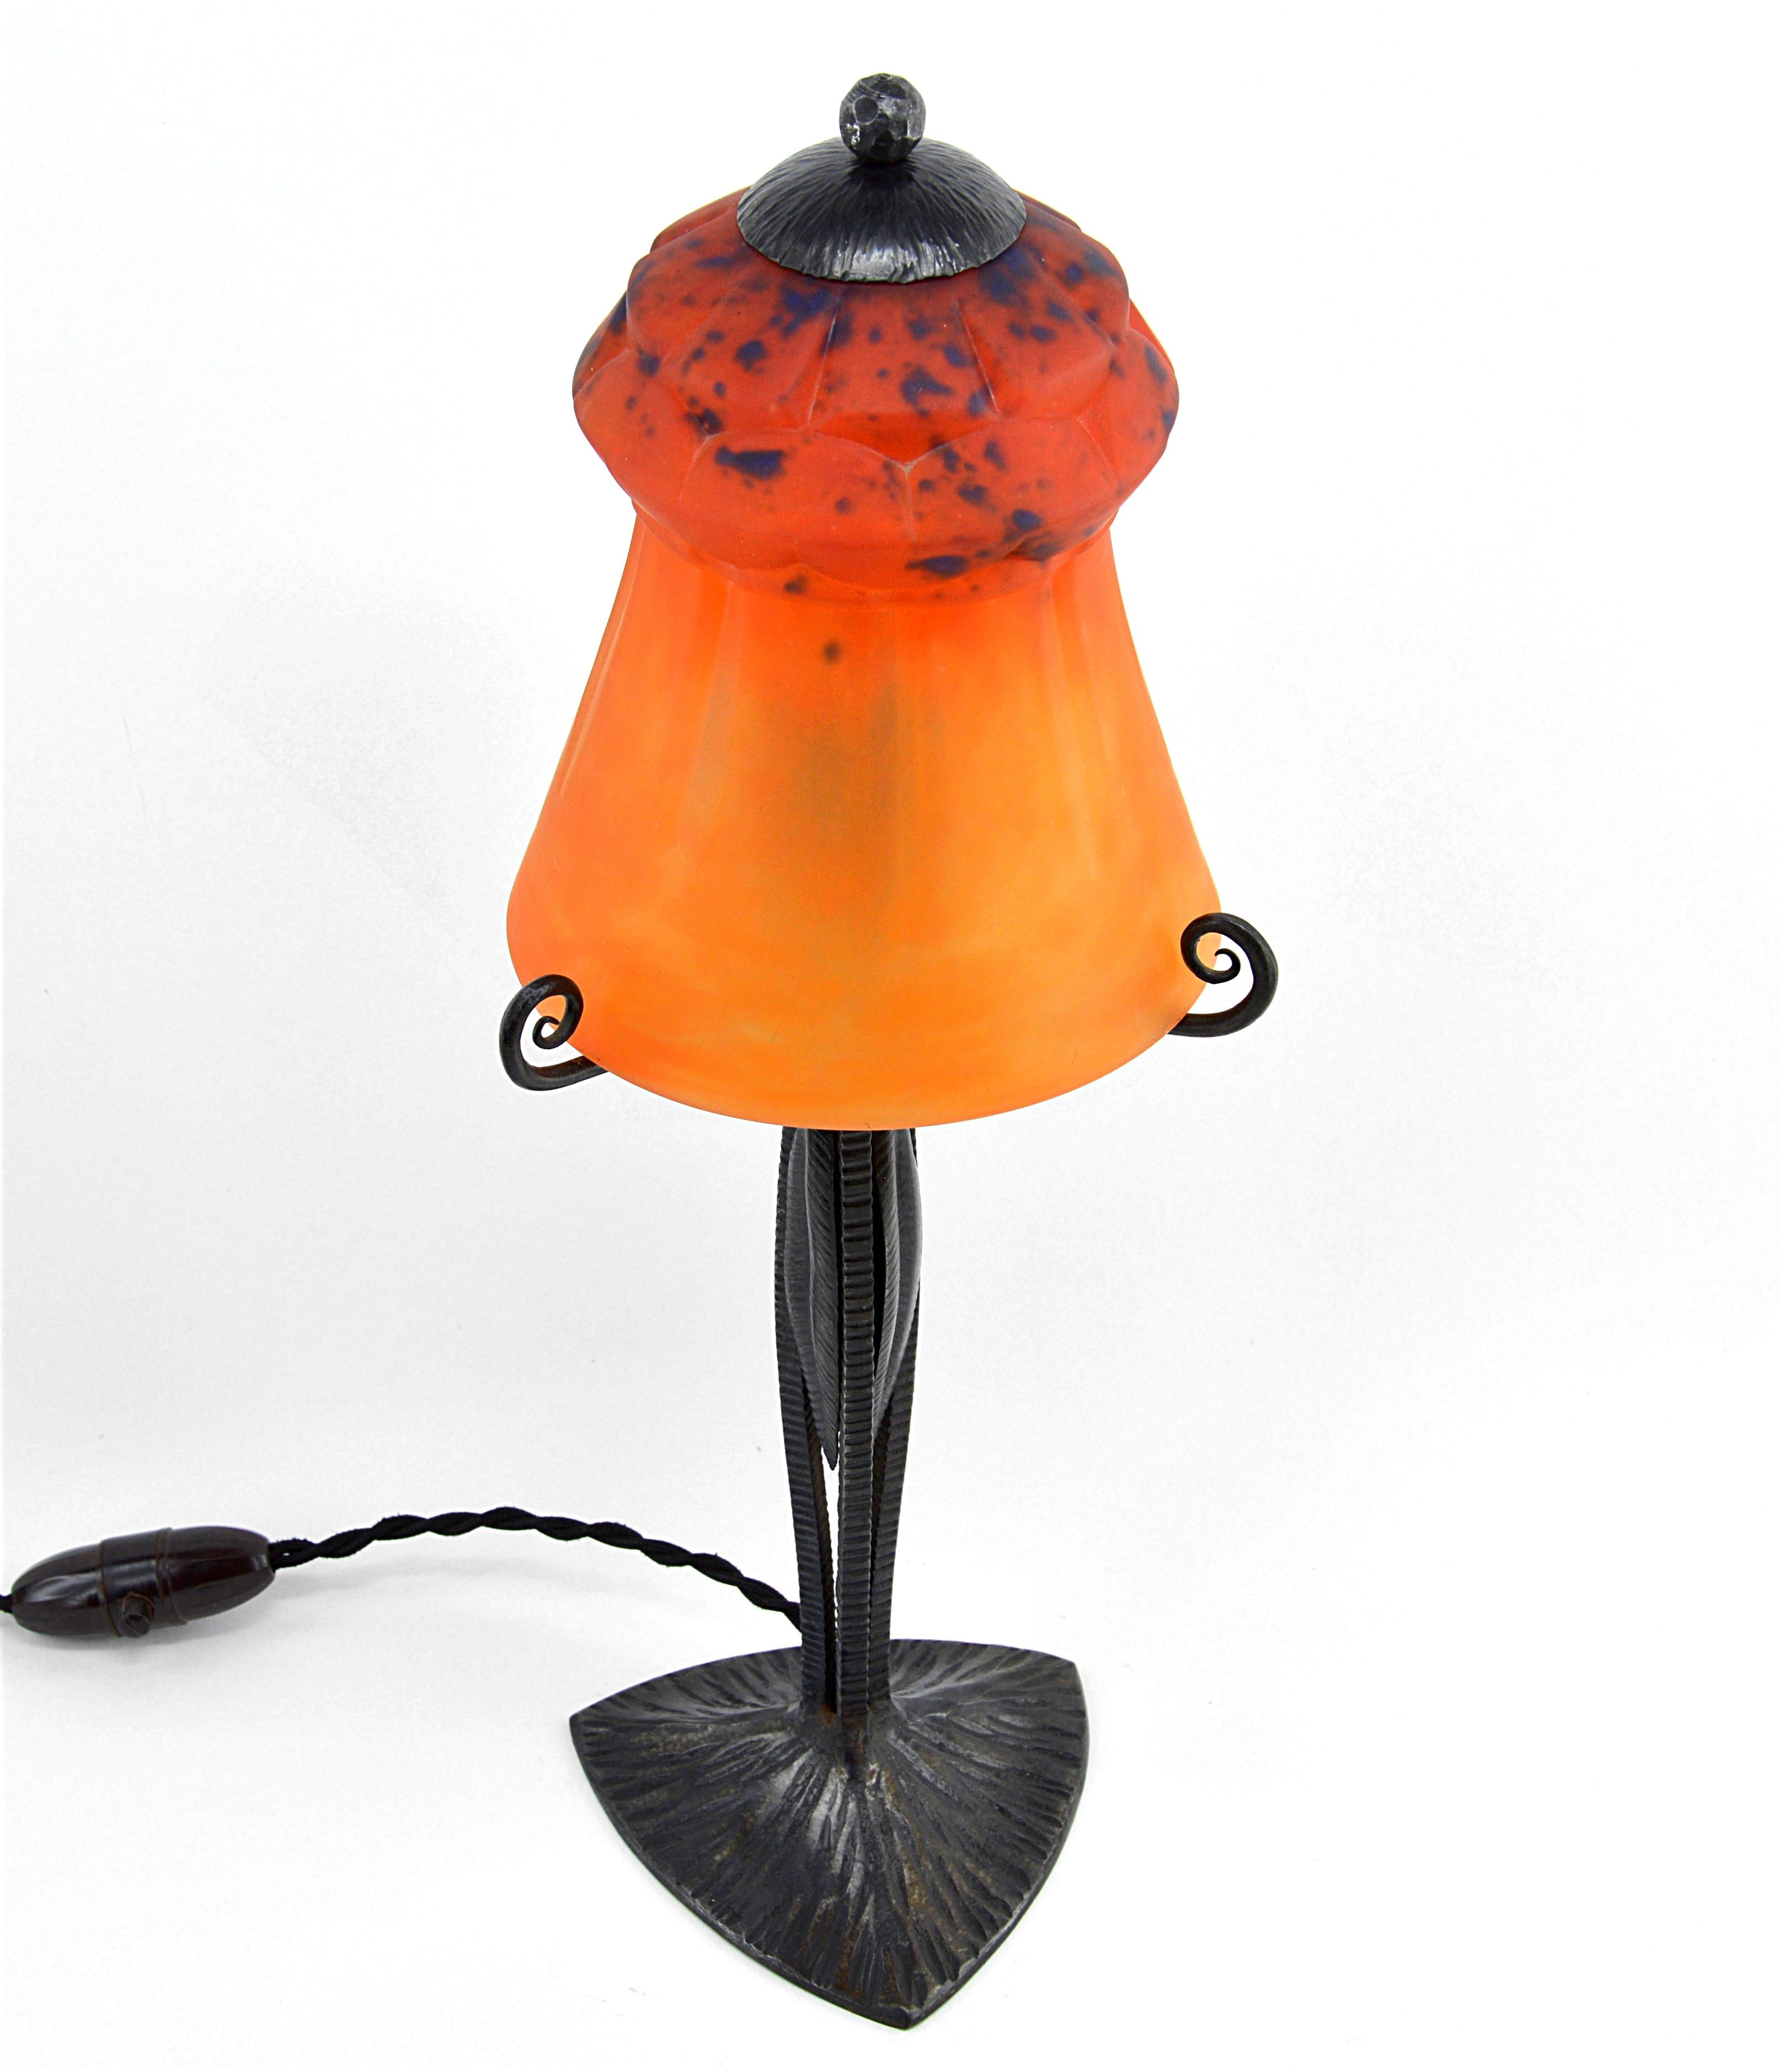 Charles Schneider and Henri Fournet Rare French Art Deco Table Lamp, 1925 For Sale 1